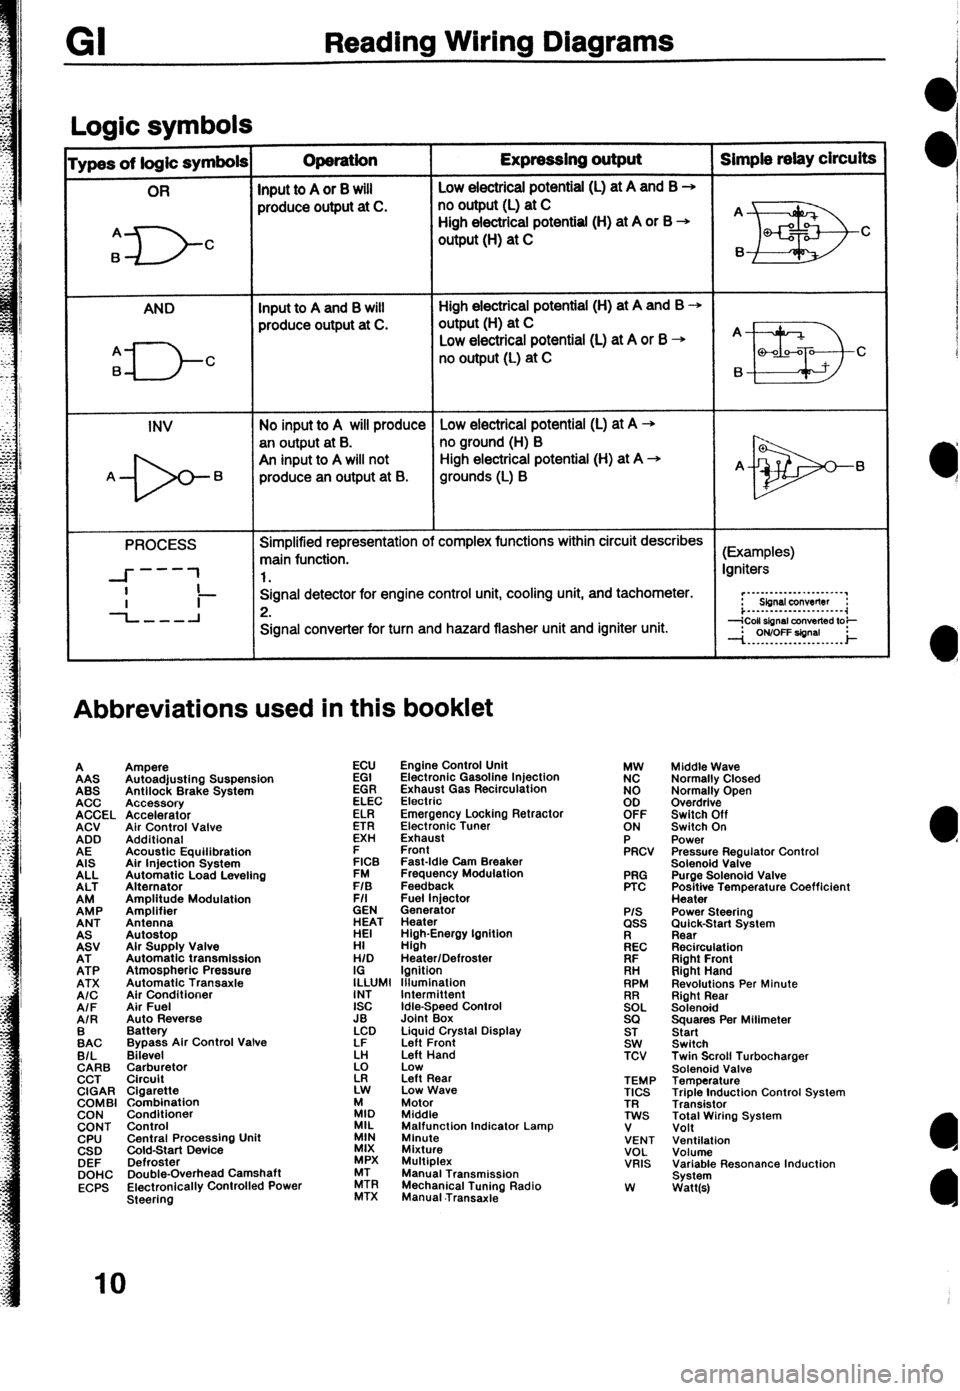 MAZDA 323 1992  Workshop Manual Suplement Reading Wiring Diagrams 
Loaic symbols I 
ypes of logic symbols Operation Expressing output Simple relay circuits 
OR 
Input to A or 8 will Low electricai potential (L) at A and B + 
produce output at